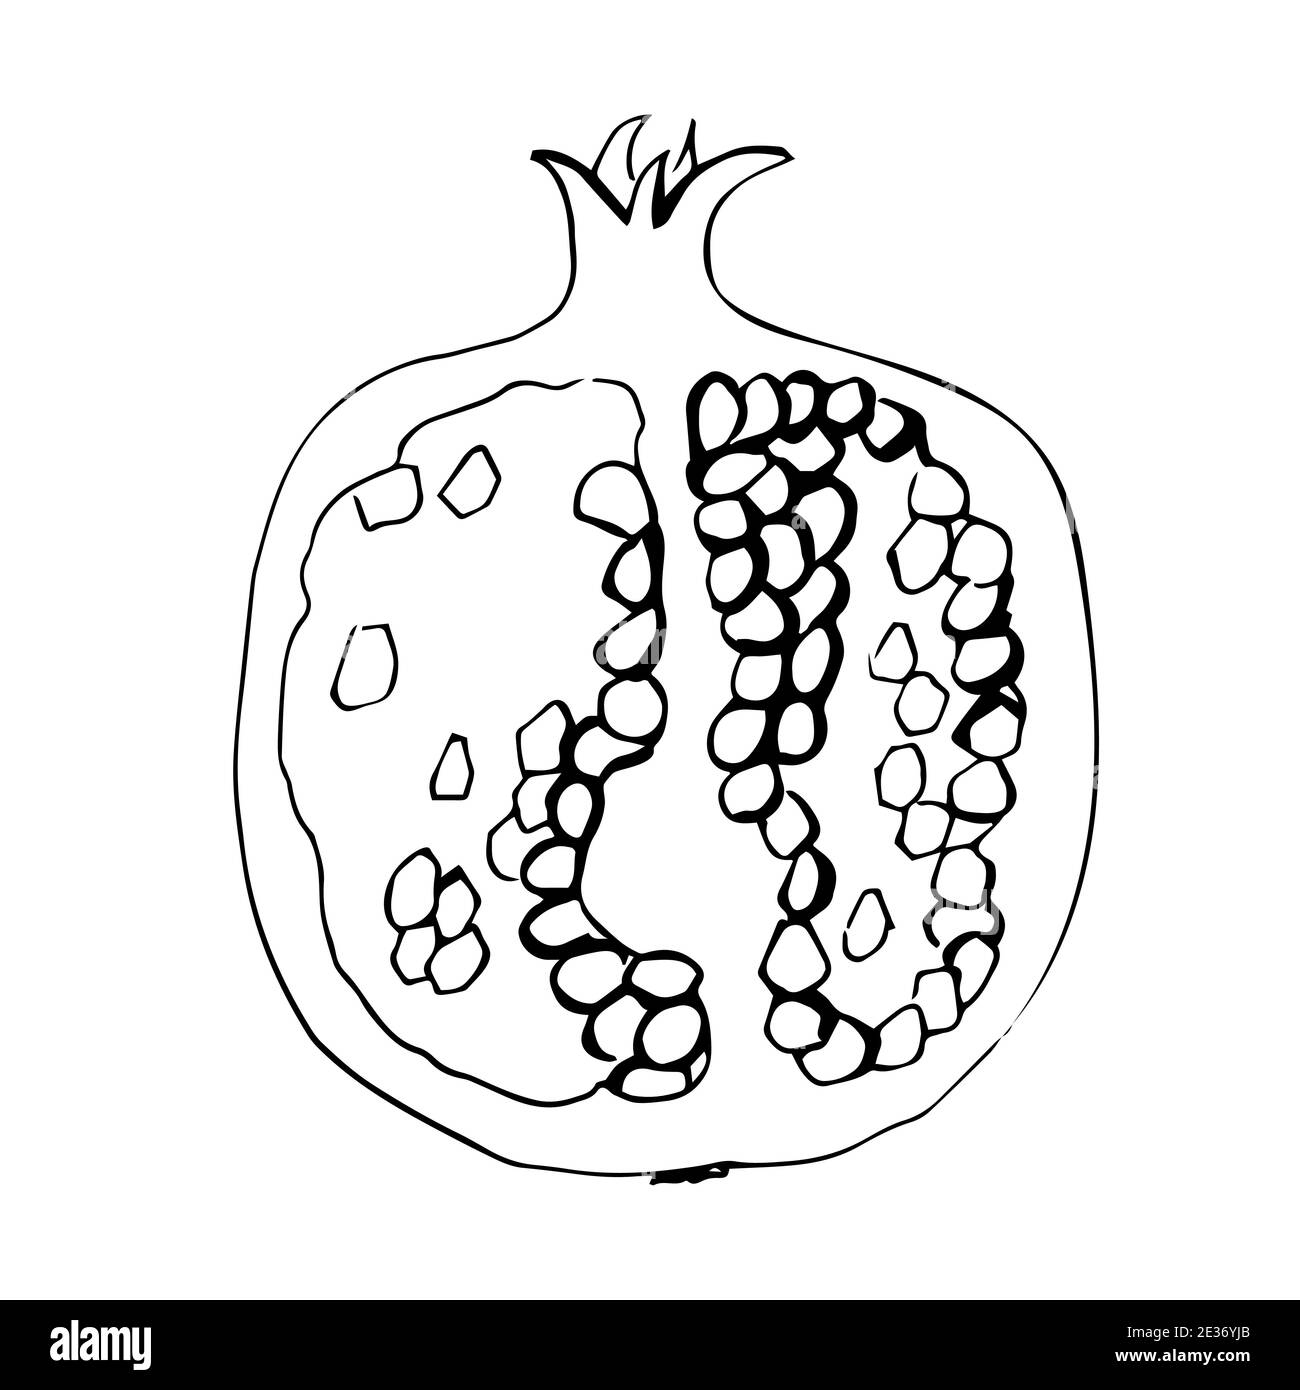 Pomegranate drawing black and white stock photos images